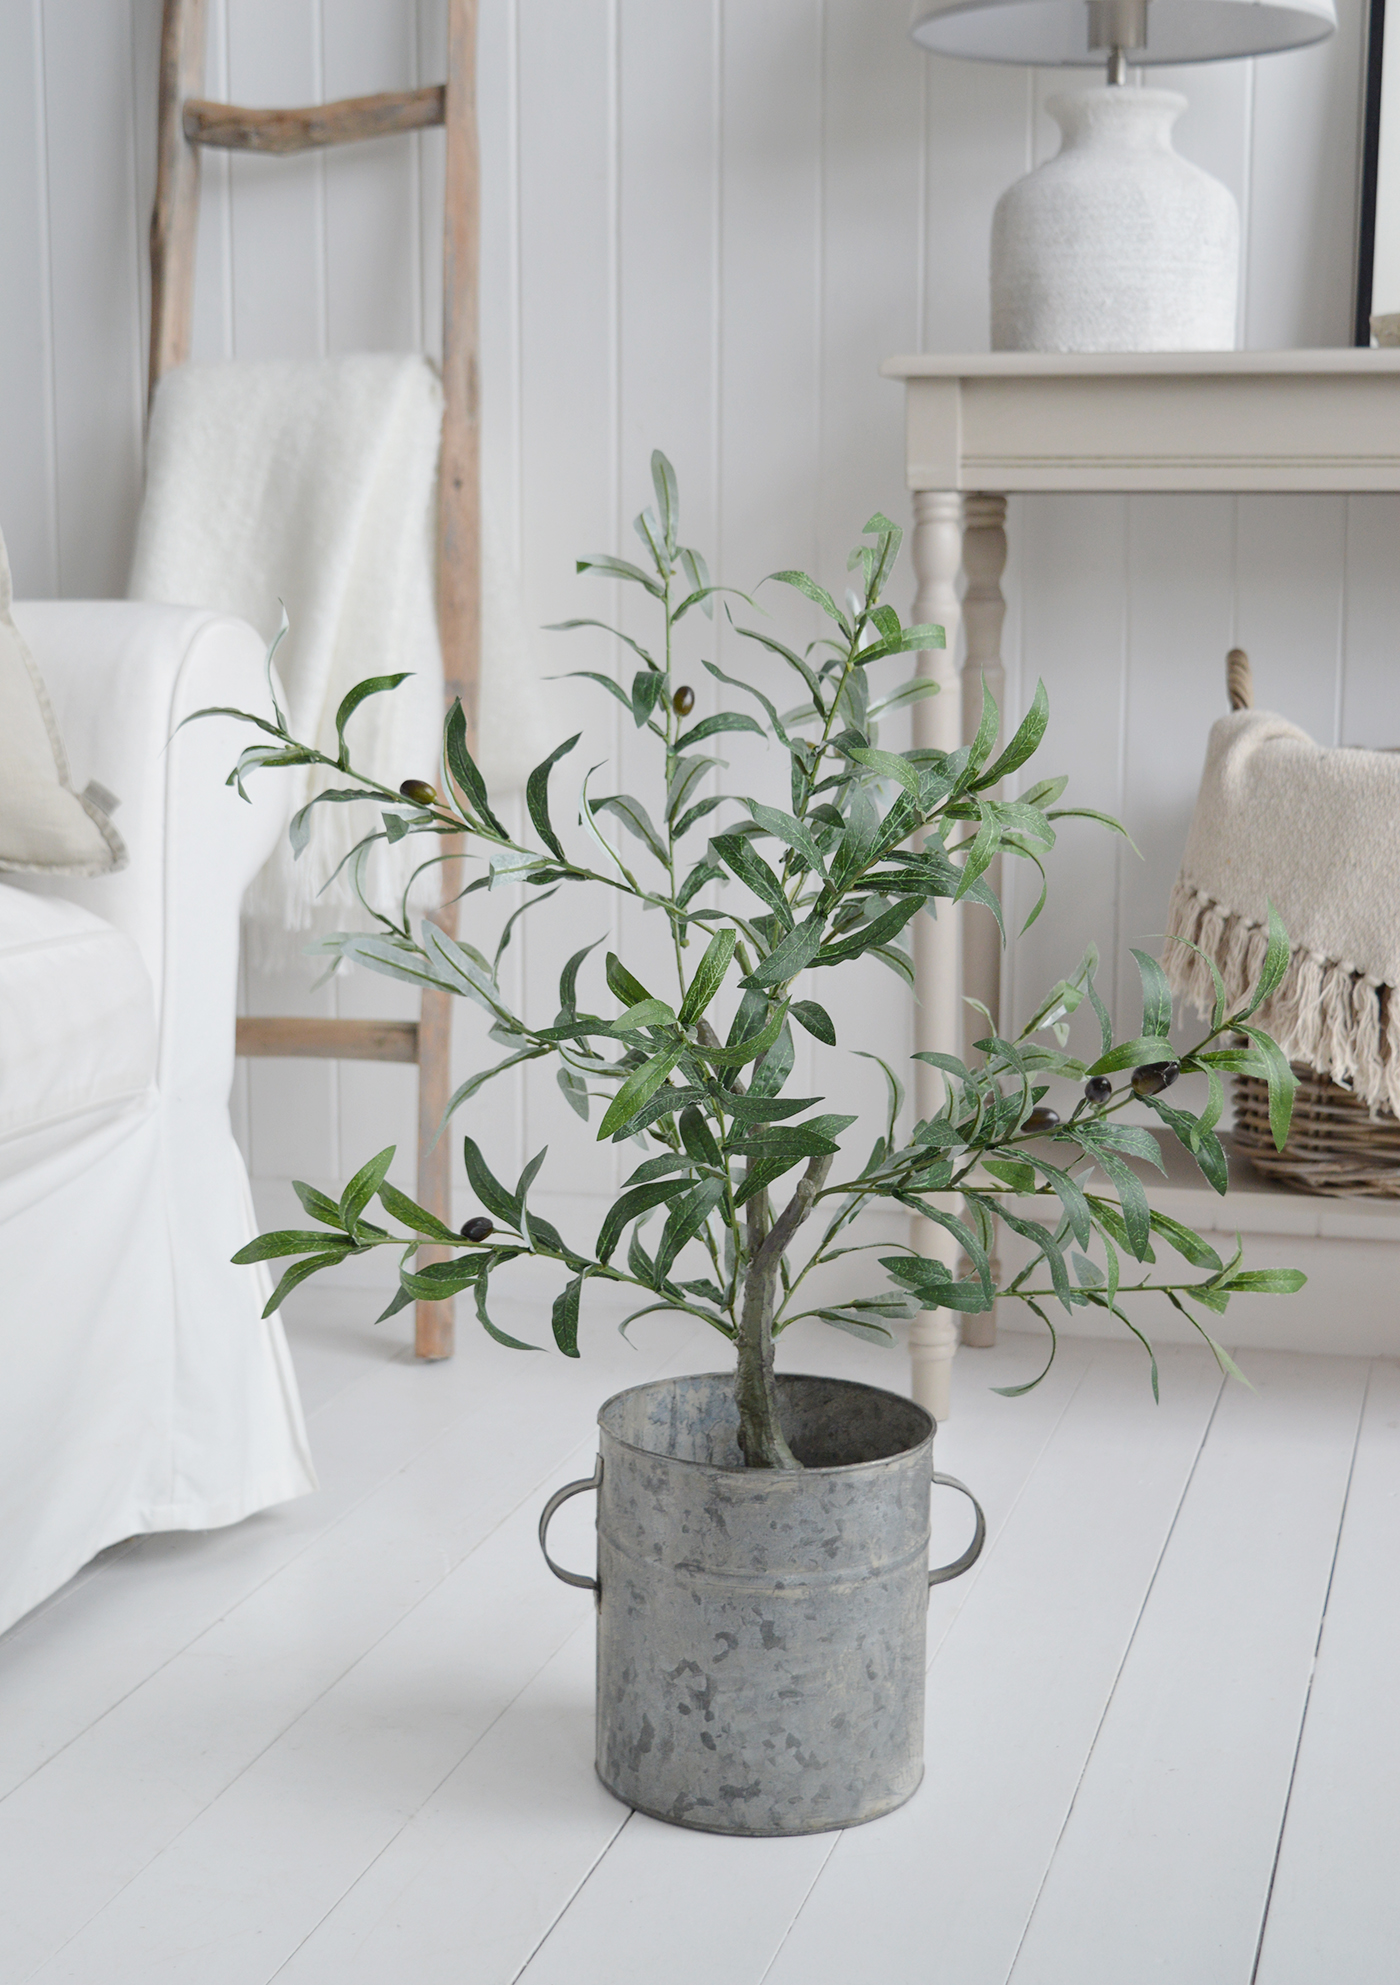 Our faux olive tree in the zinc tub pot to complement our New England style of interiors